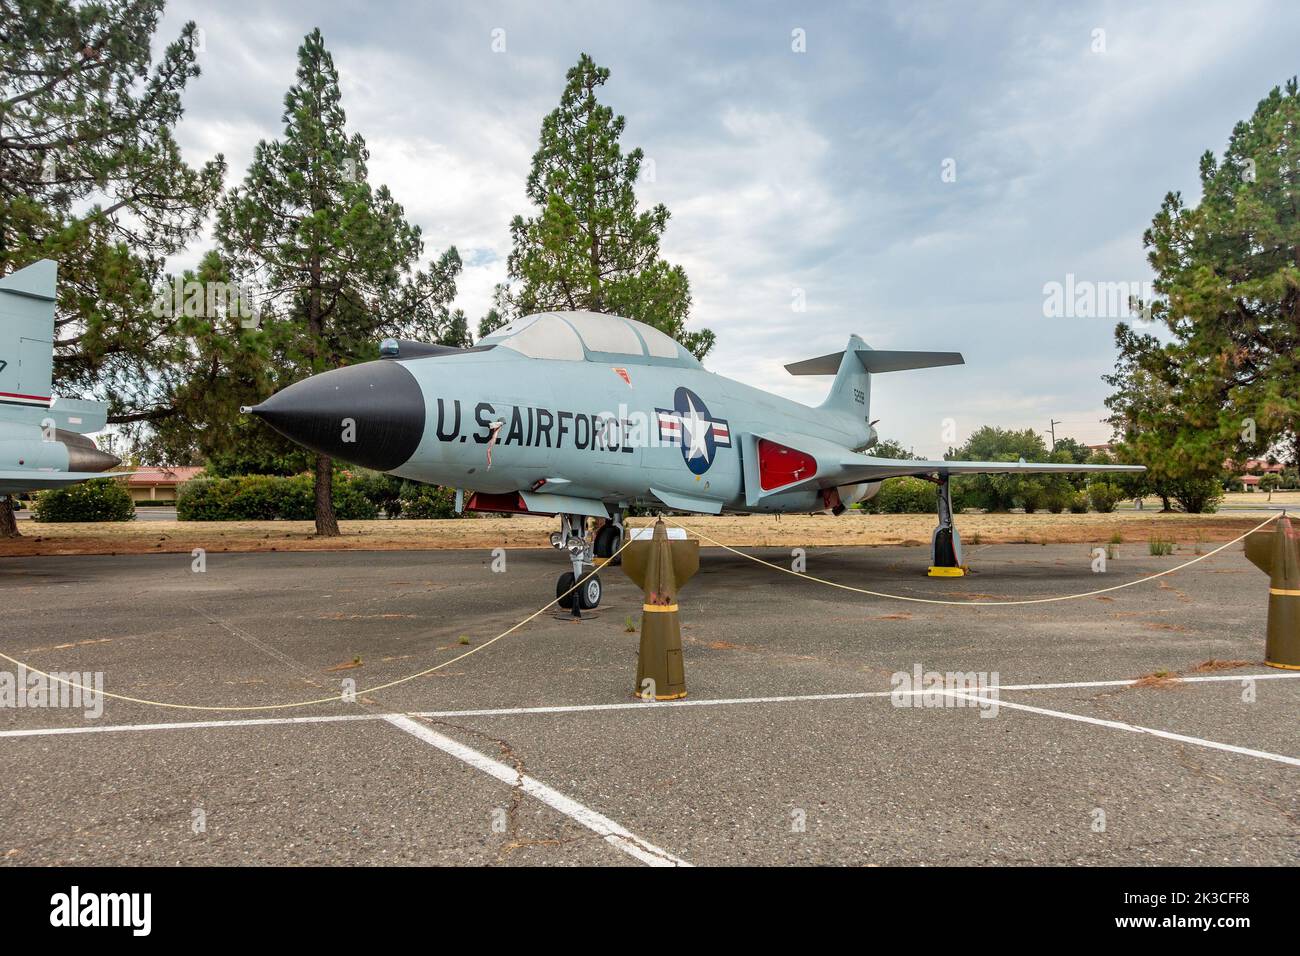 A McDonnel F-101B Voodoo interceptor aircraft on display at The Travis Airforce Base in California, USA Stock Photo